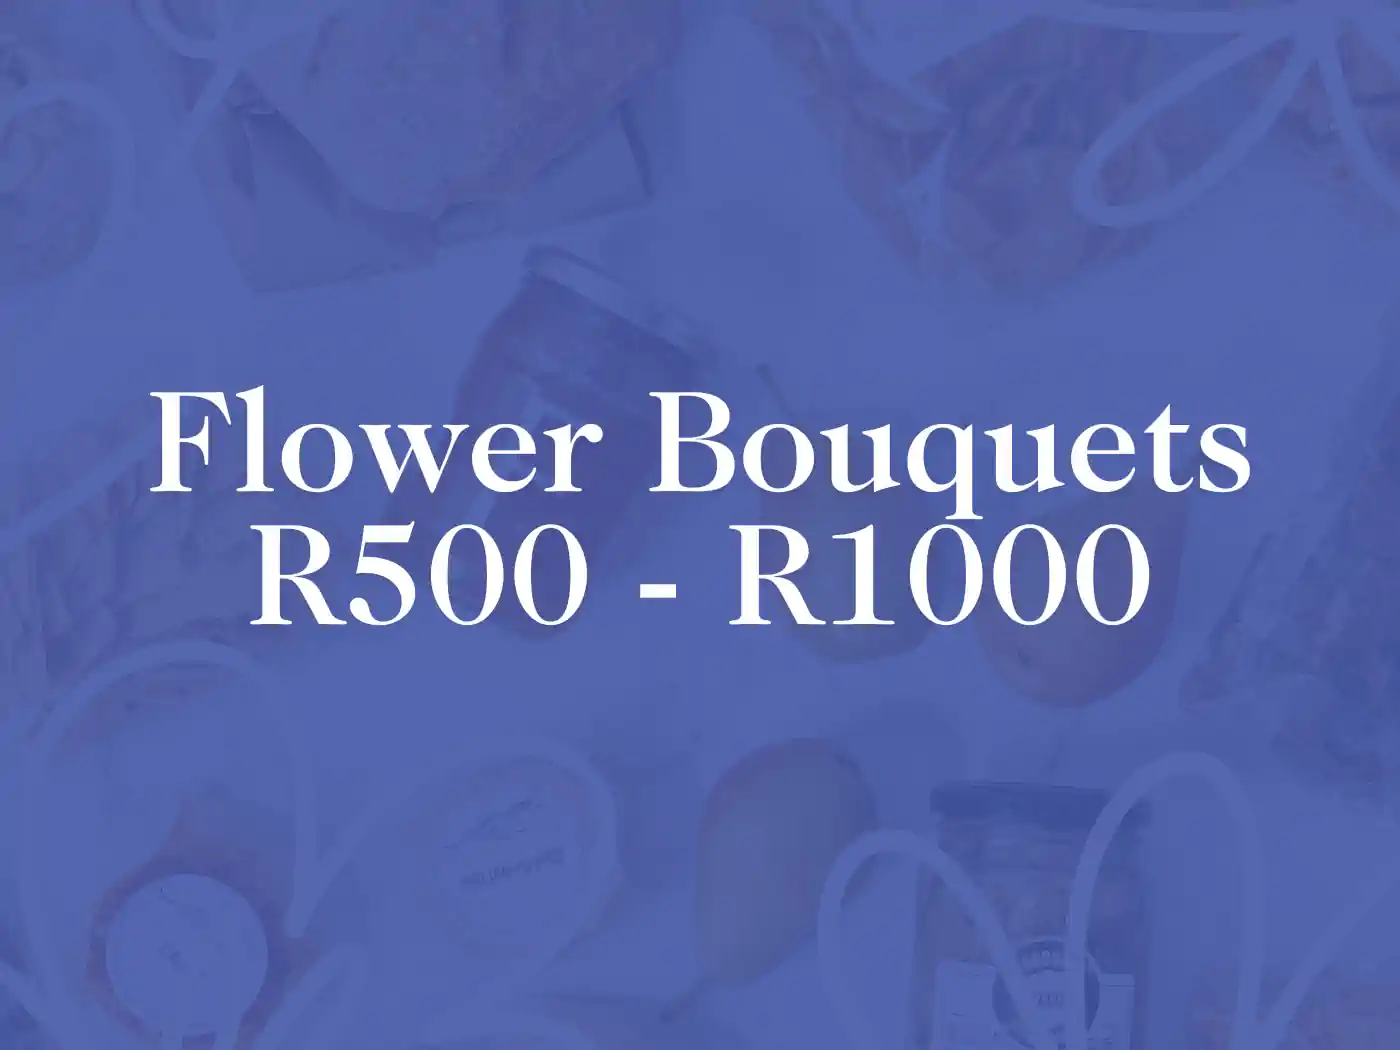 Promotional image for Flower Bouquets priced between R500 and R1000, set against a monochrome blue background with subtle heart shapes and various obscured grocery items. Fabulous Flowers and Gifts.